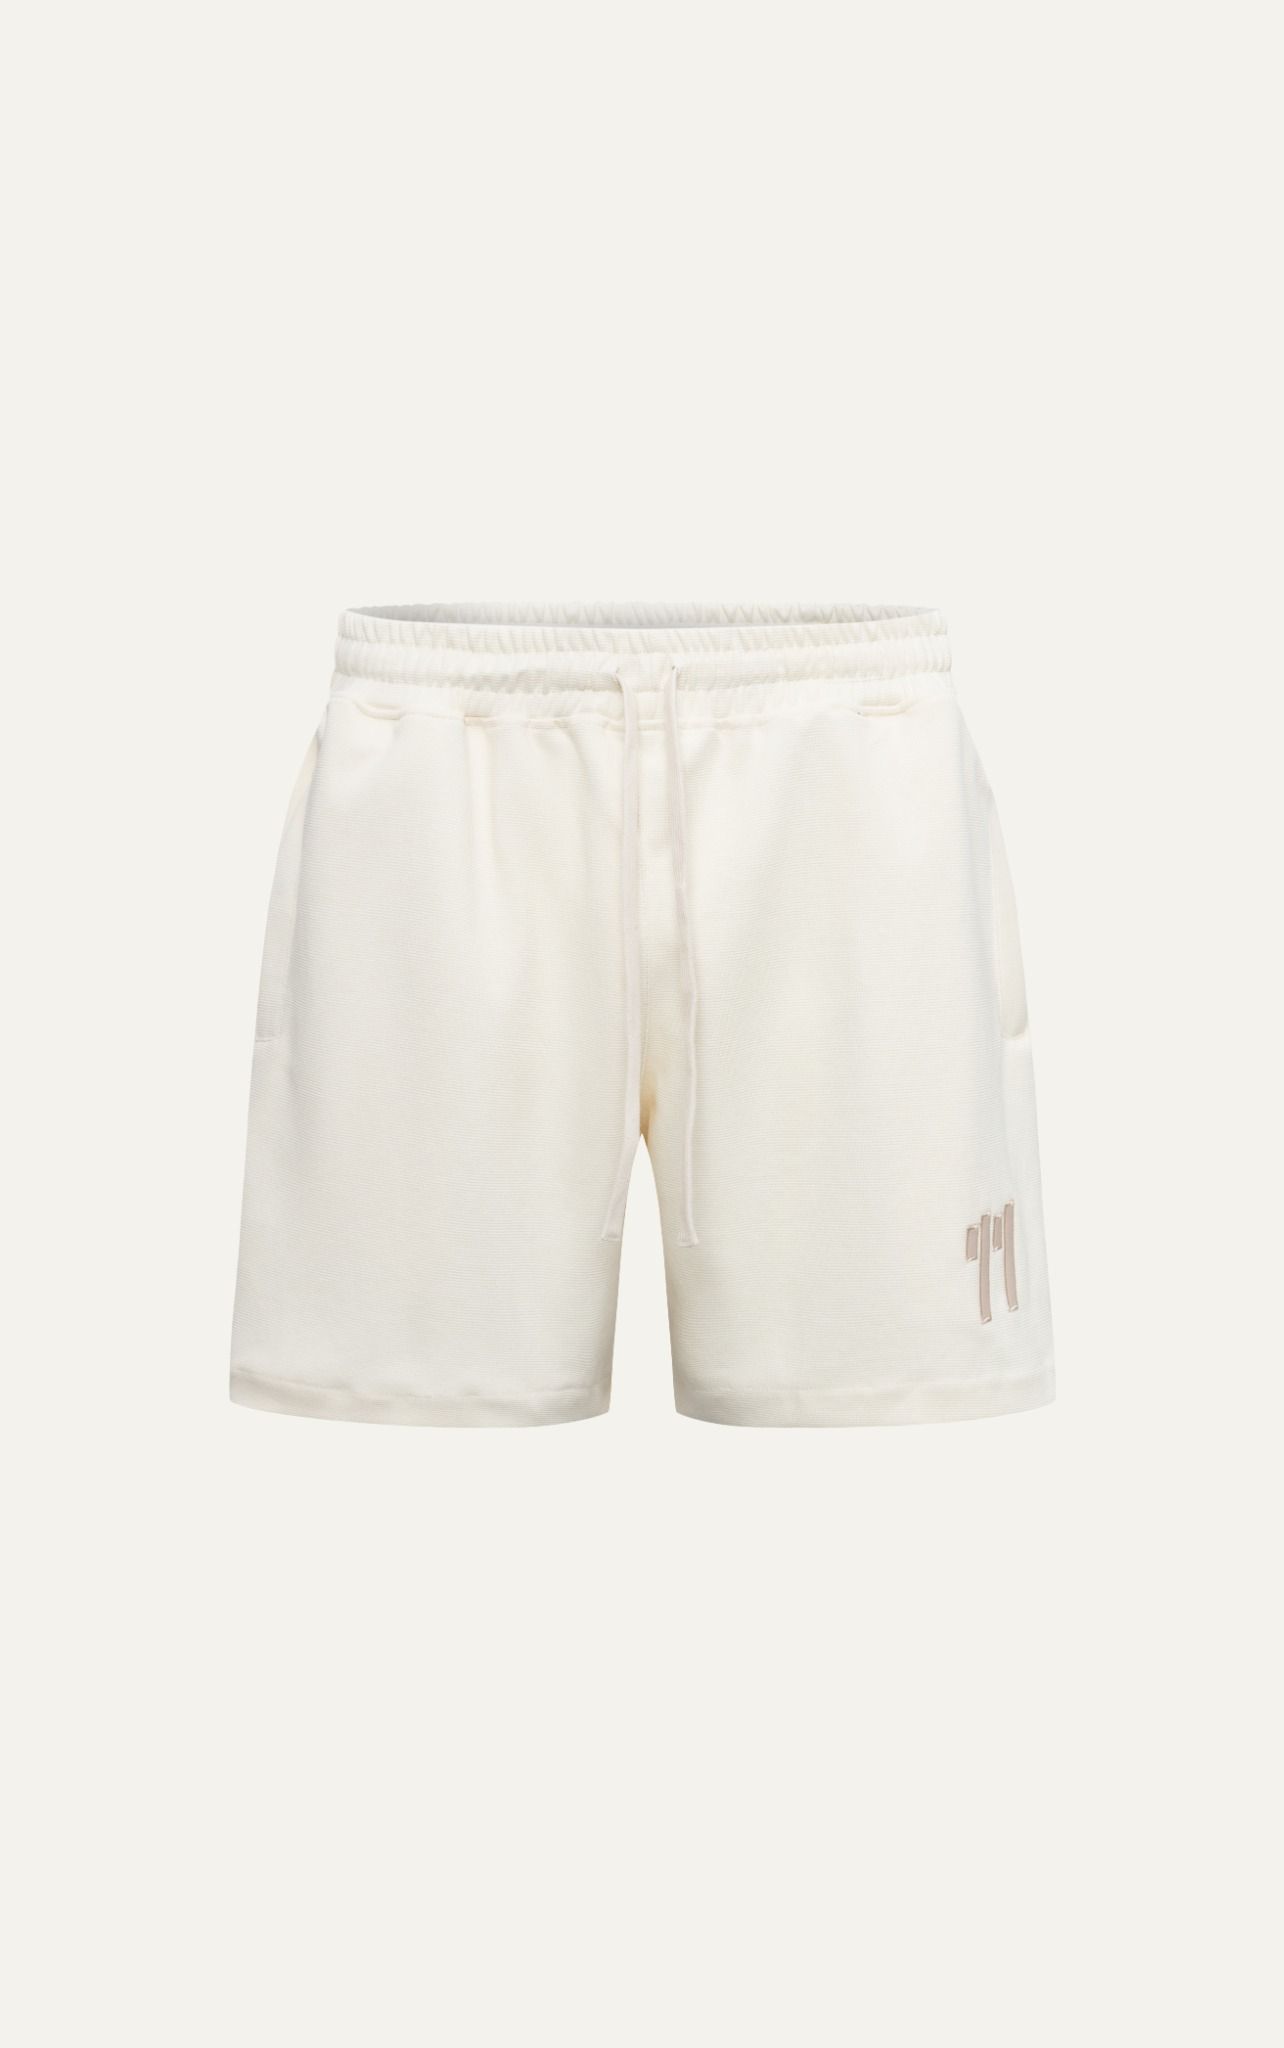  AG12 STUDIO LOOSE FIT ICONIC "11" SHORT - OFF WHITE 